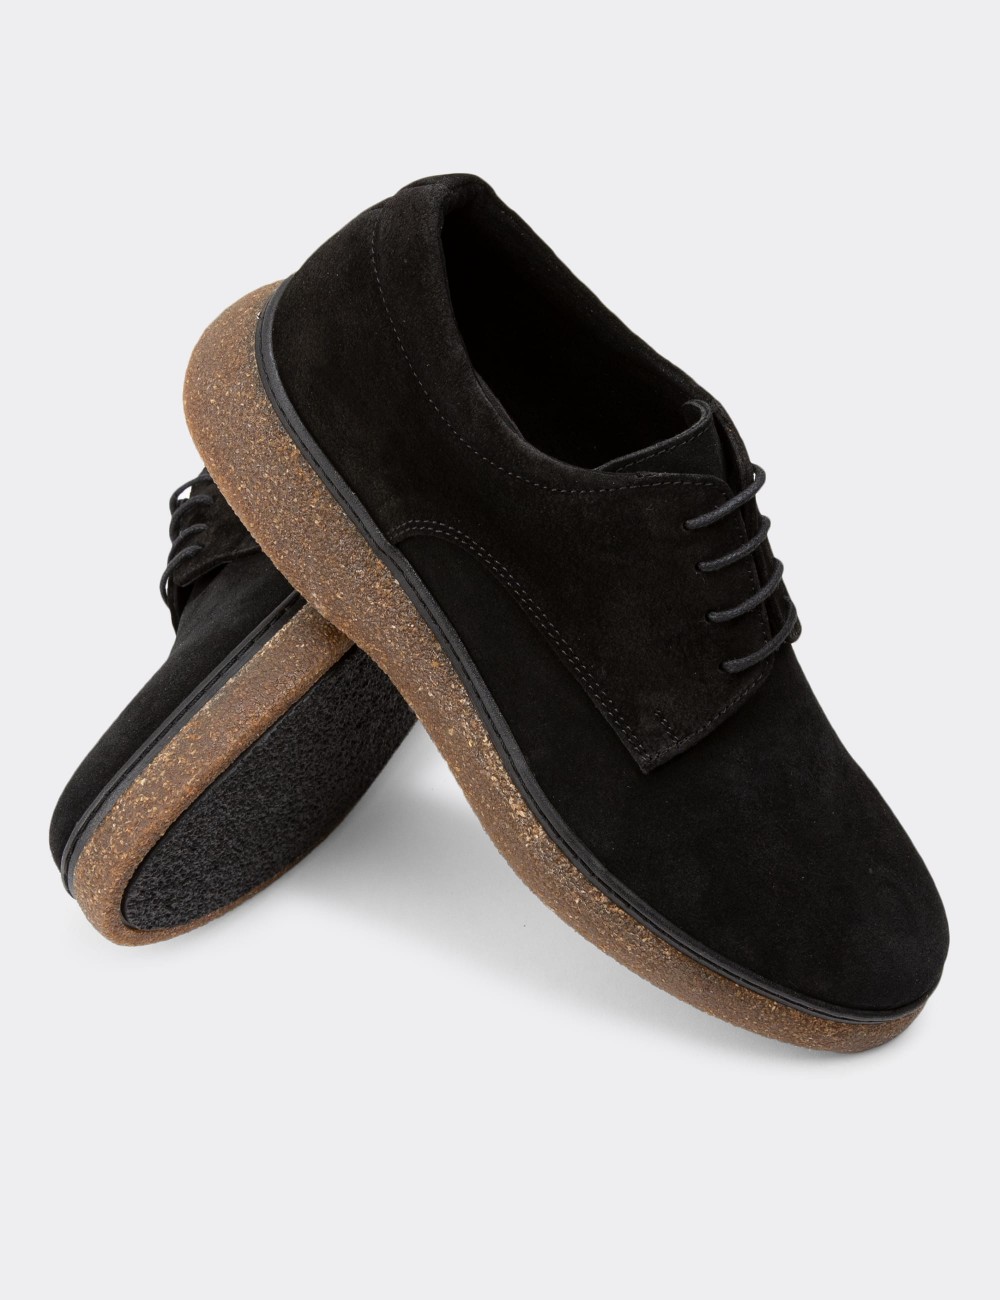 Black Suede Leather Lace-up Shoes - 01934MSYHC01